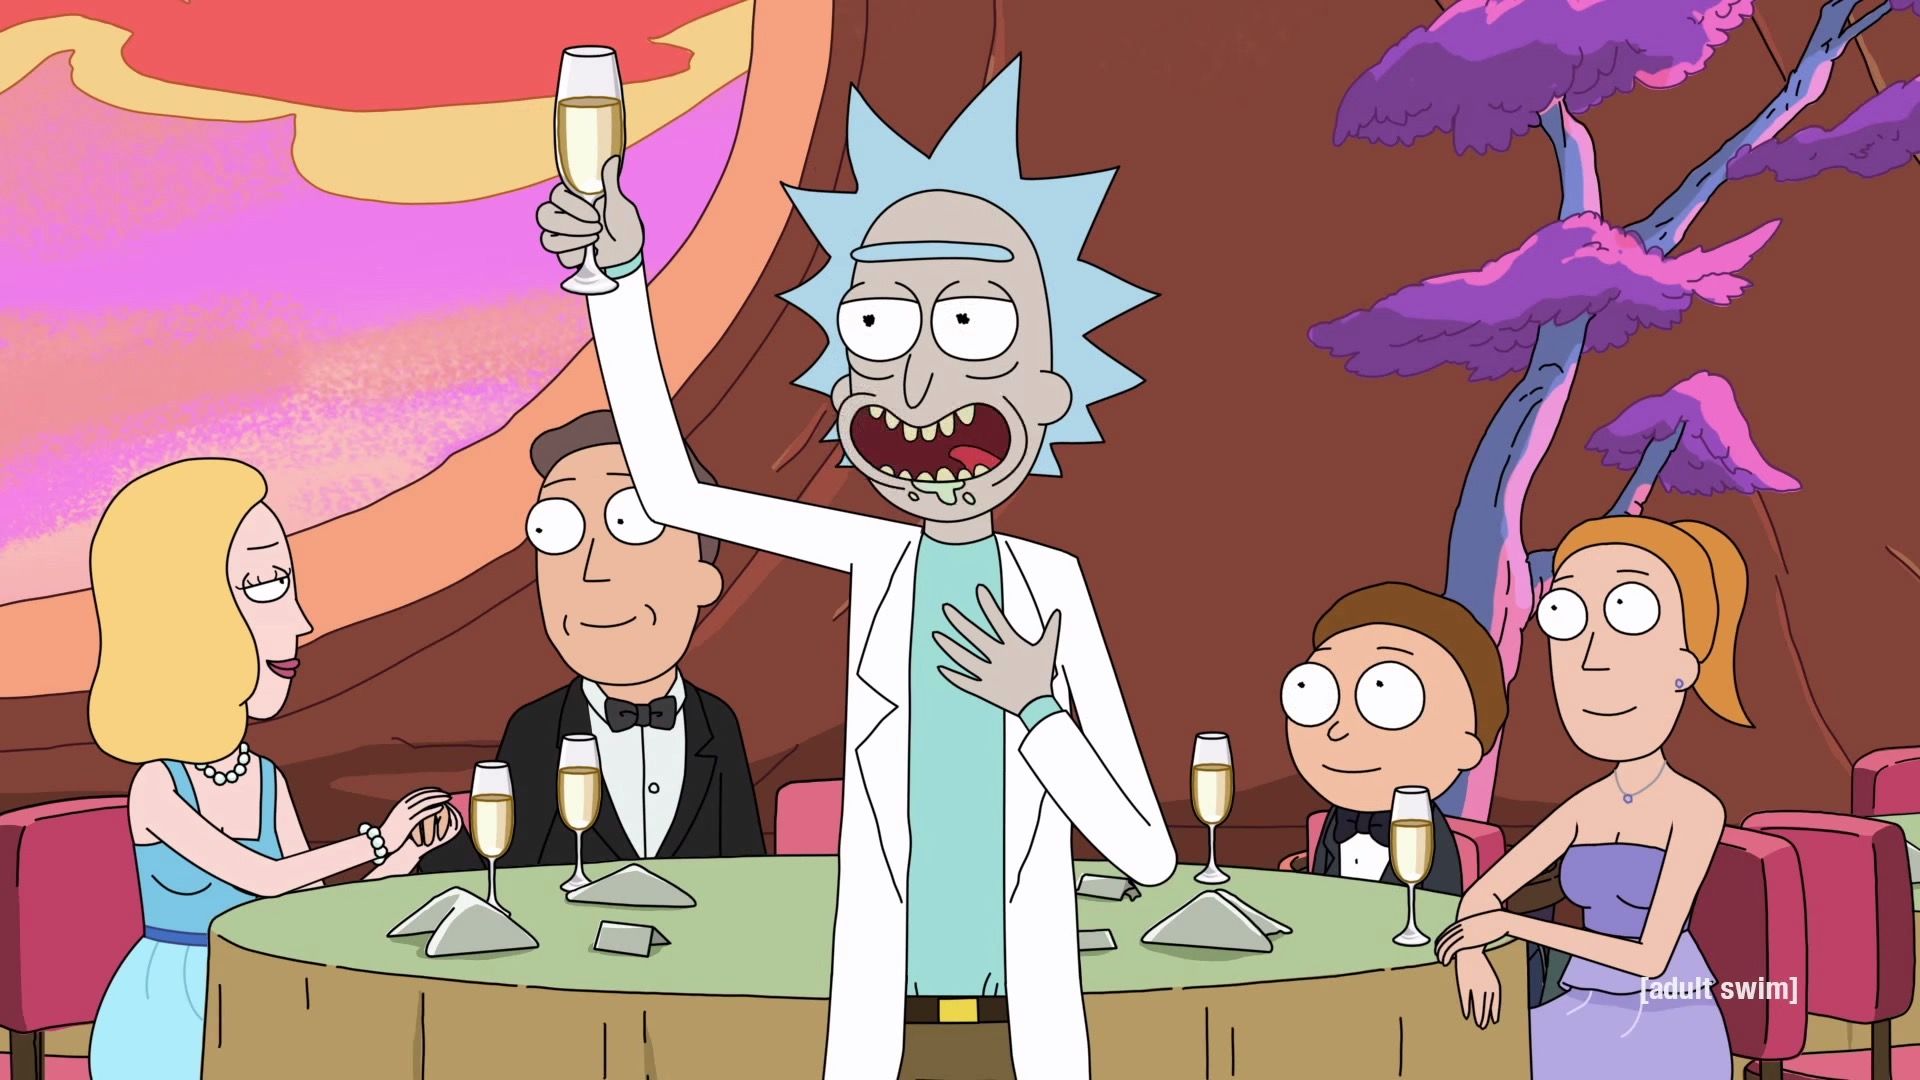 Rick and Morty Season 4 Episode 6 Release Date April Fool's Day Episode Release Confirmed